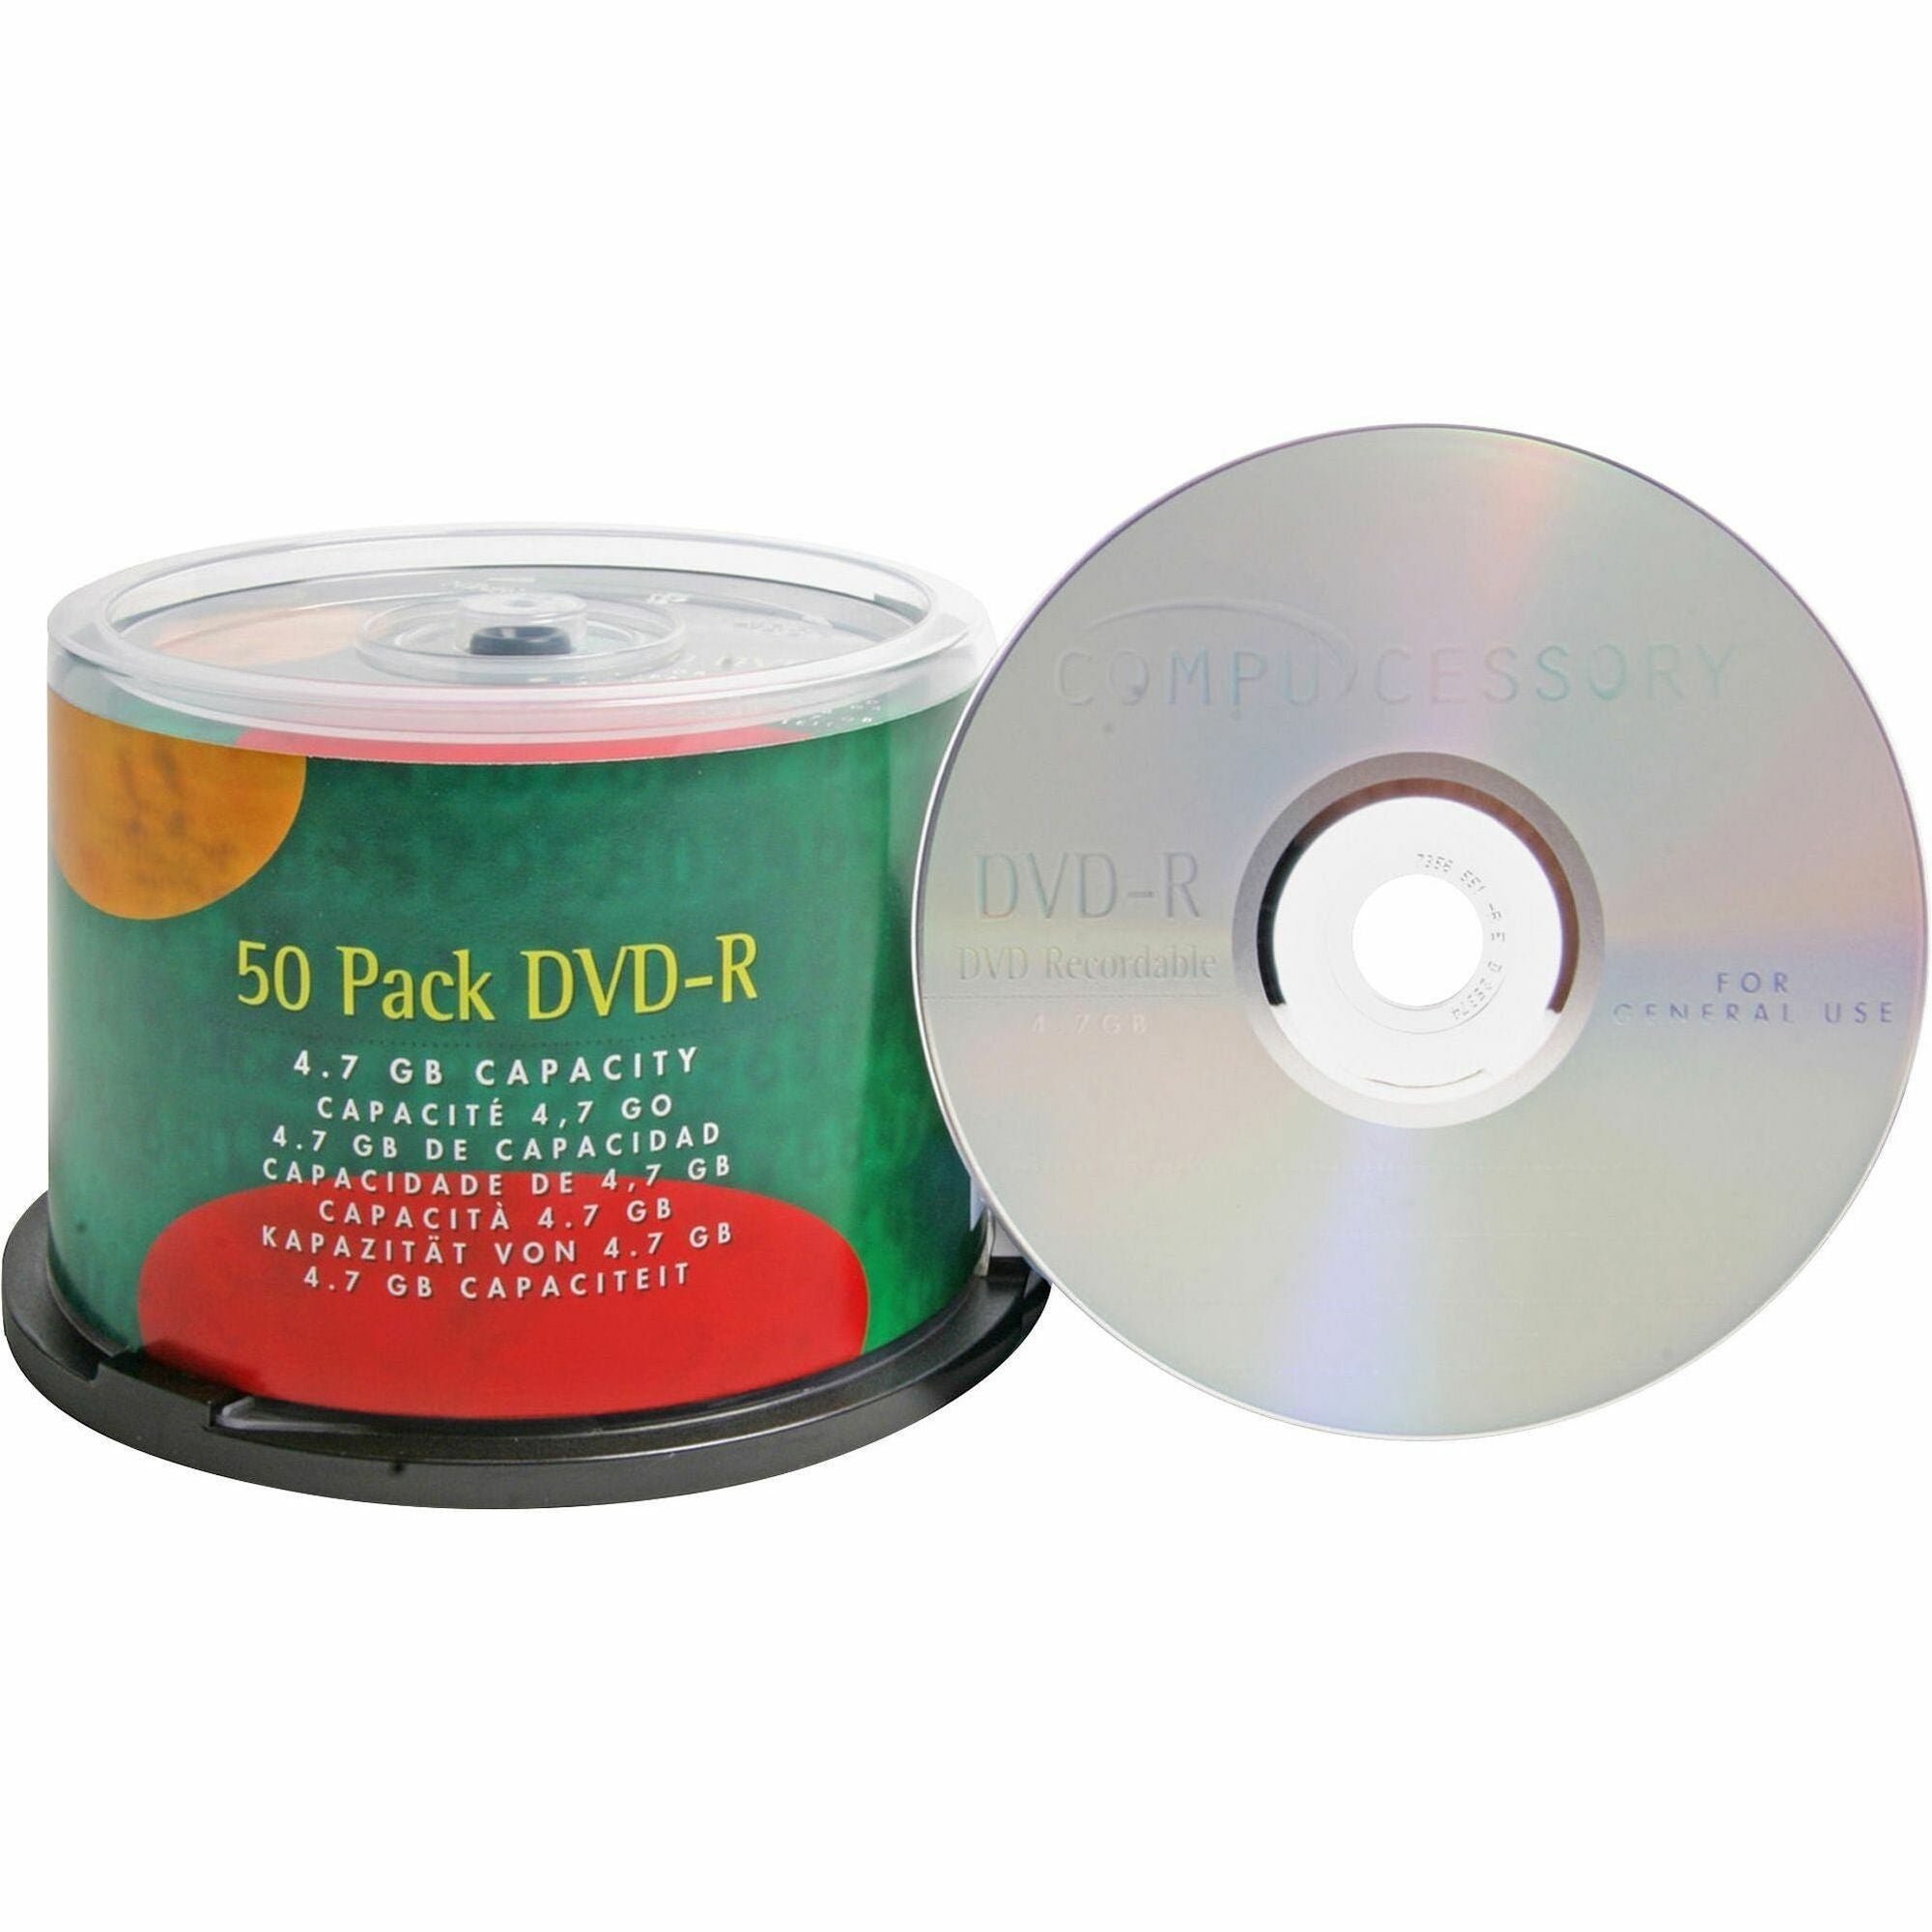 Compucessory DVD Recordable Media - DVD-R - 16x - 4.70 GB - 50 Pack - 120mm - 2 Hour Maximum Recording Time - 